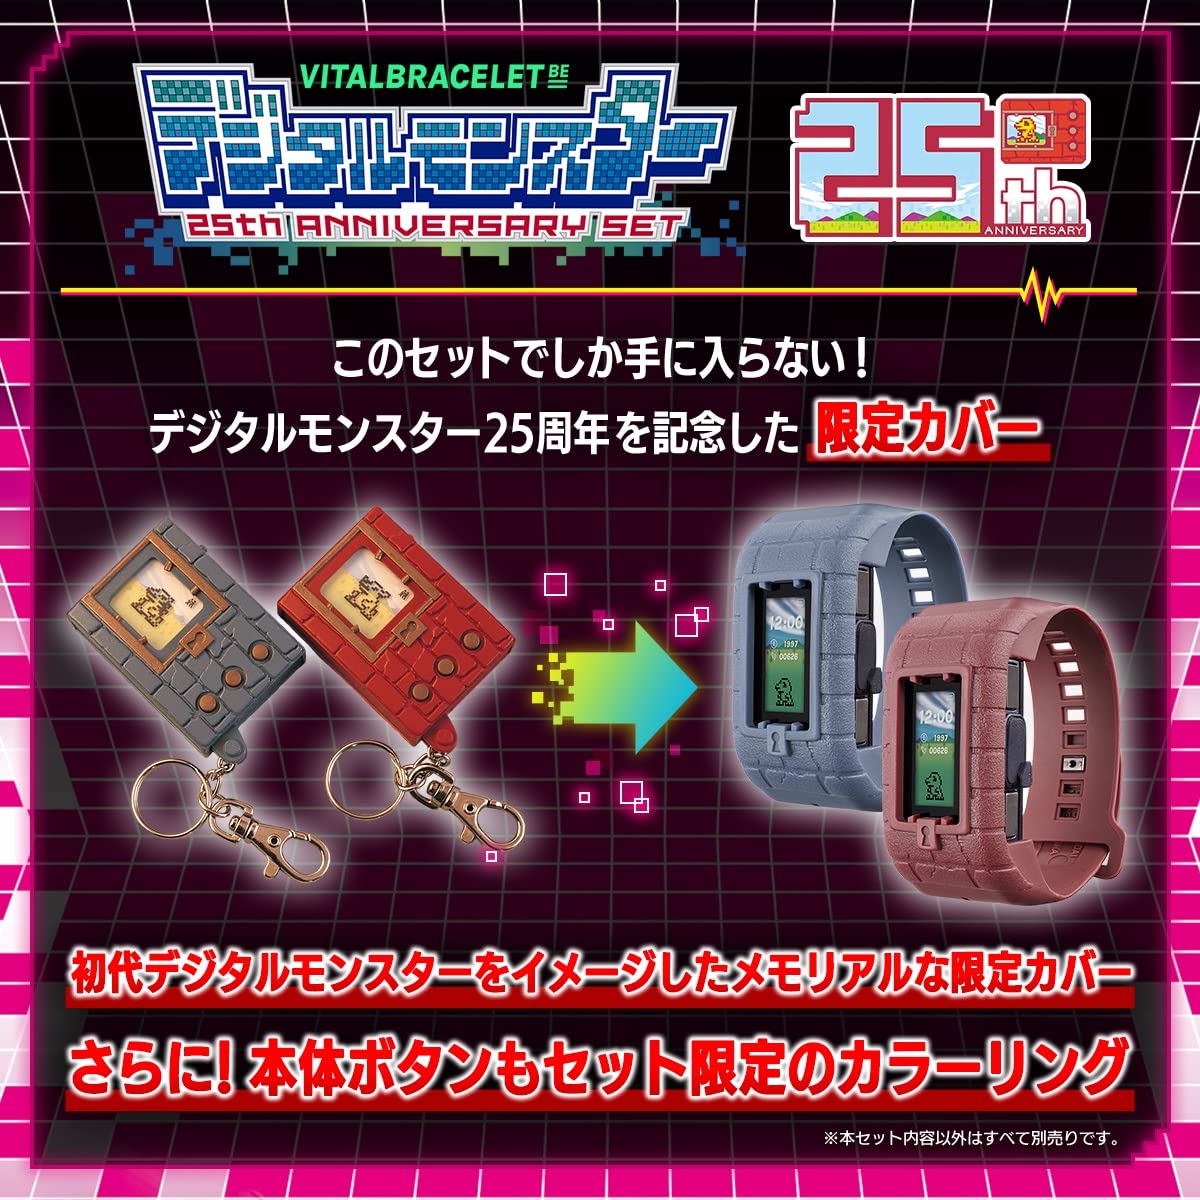 Bandai Vital Bracelet BE Digital Monster 25th Anniversary Set | Vital Bracelet Digital Pet Watch with Memory Card Included Based On Digimon Anime | Train Your Virtual Pet Using This Fitness Tracker